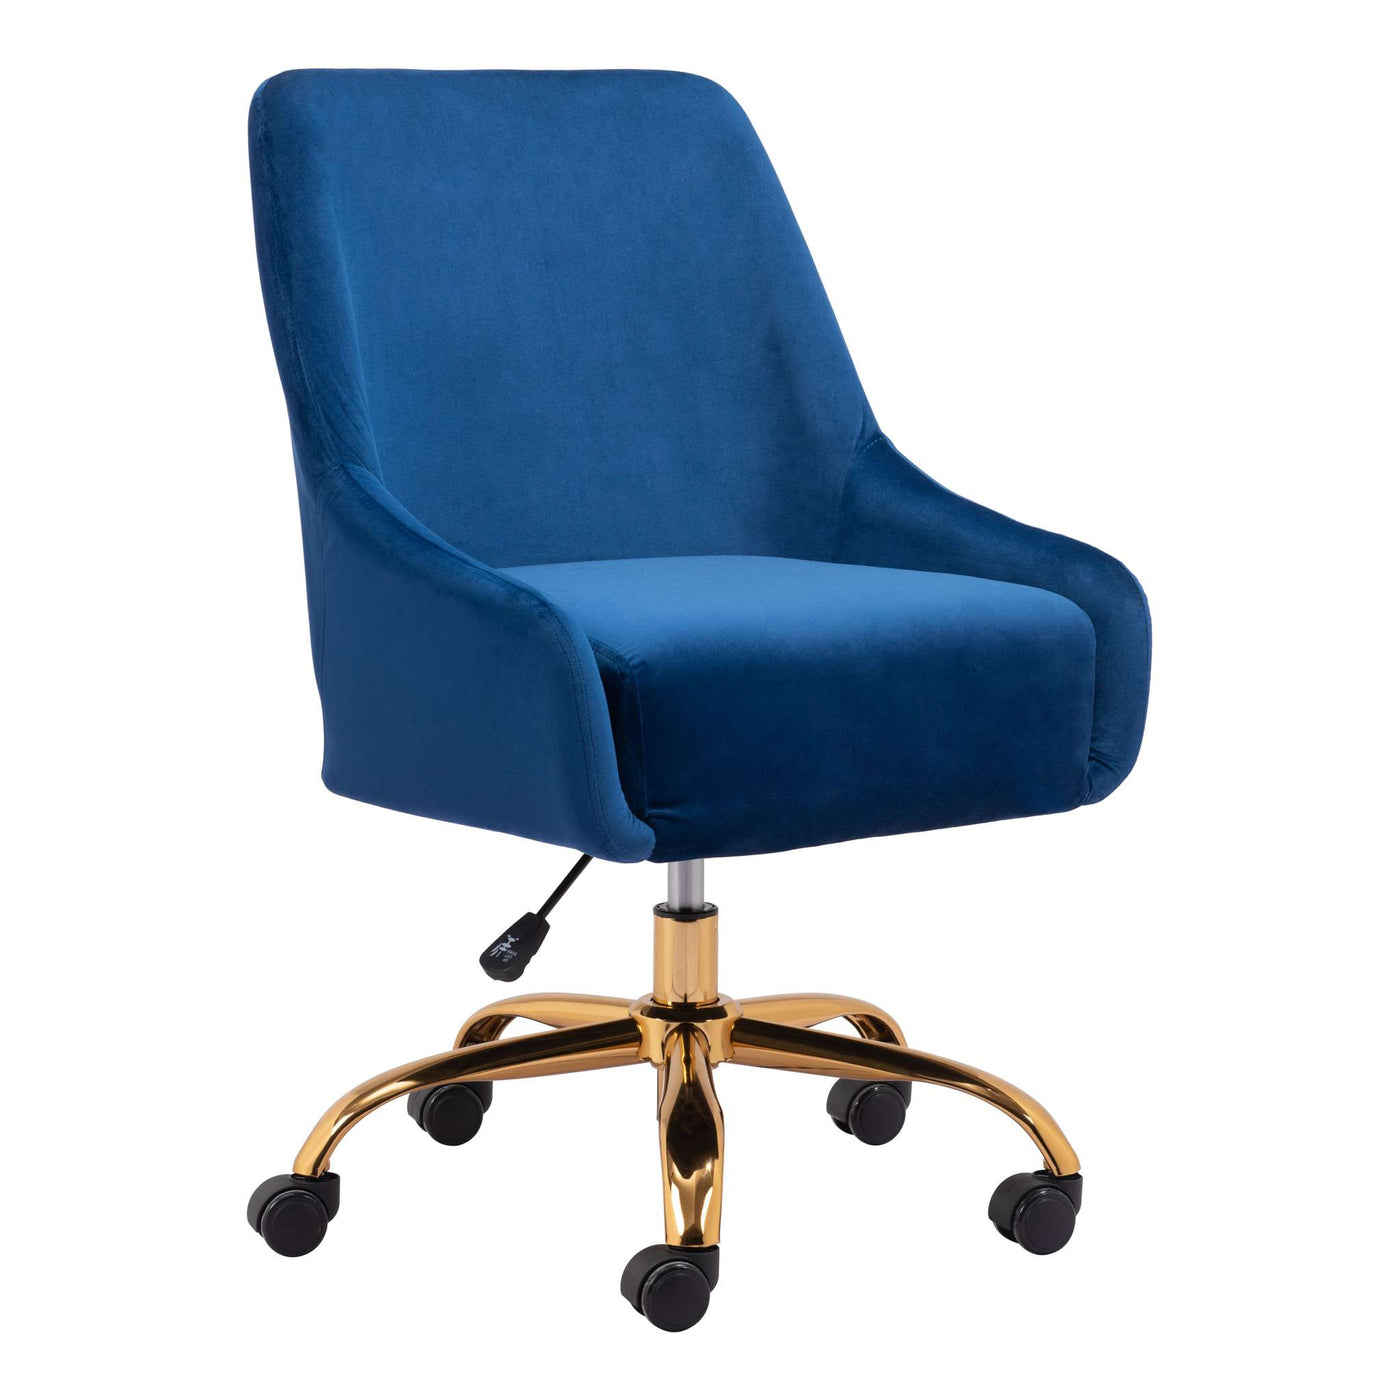 Zuo Mod Madelaine Office Chair